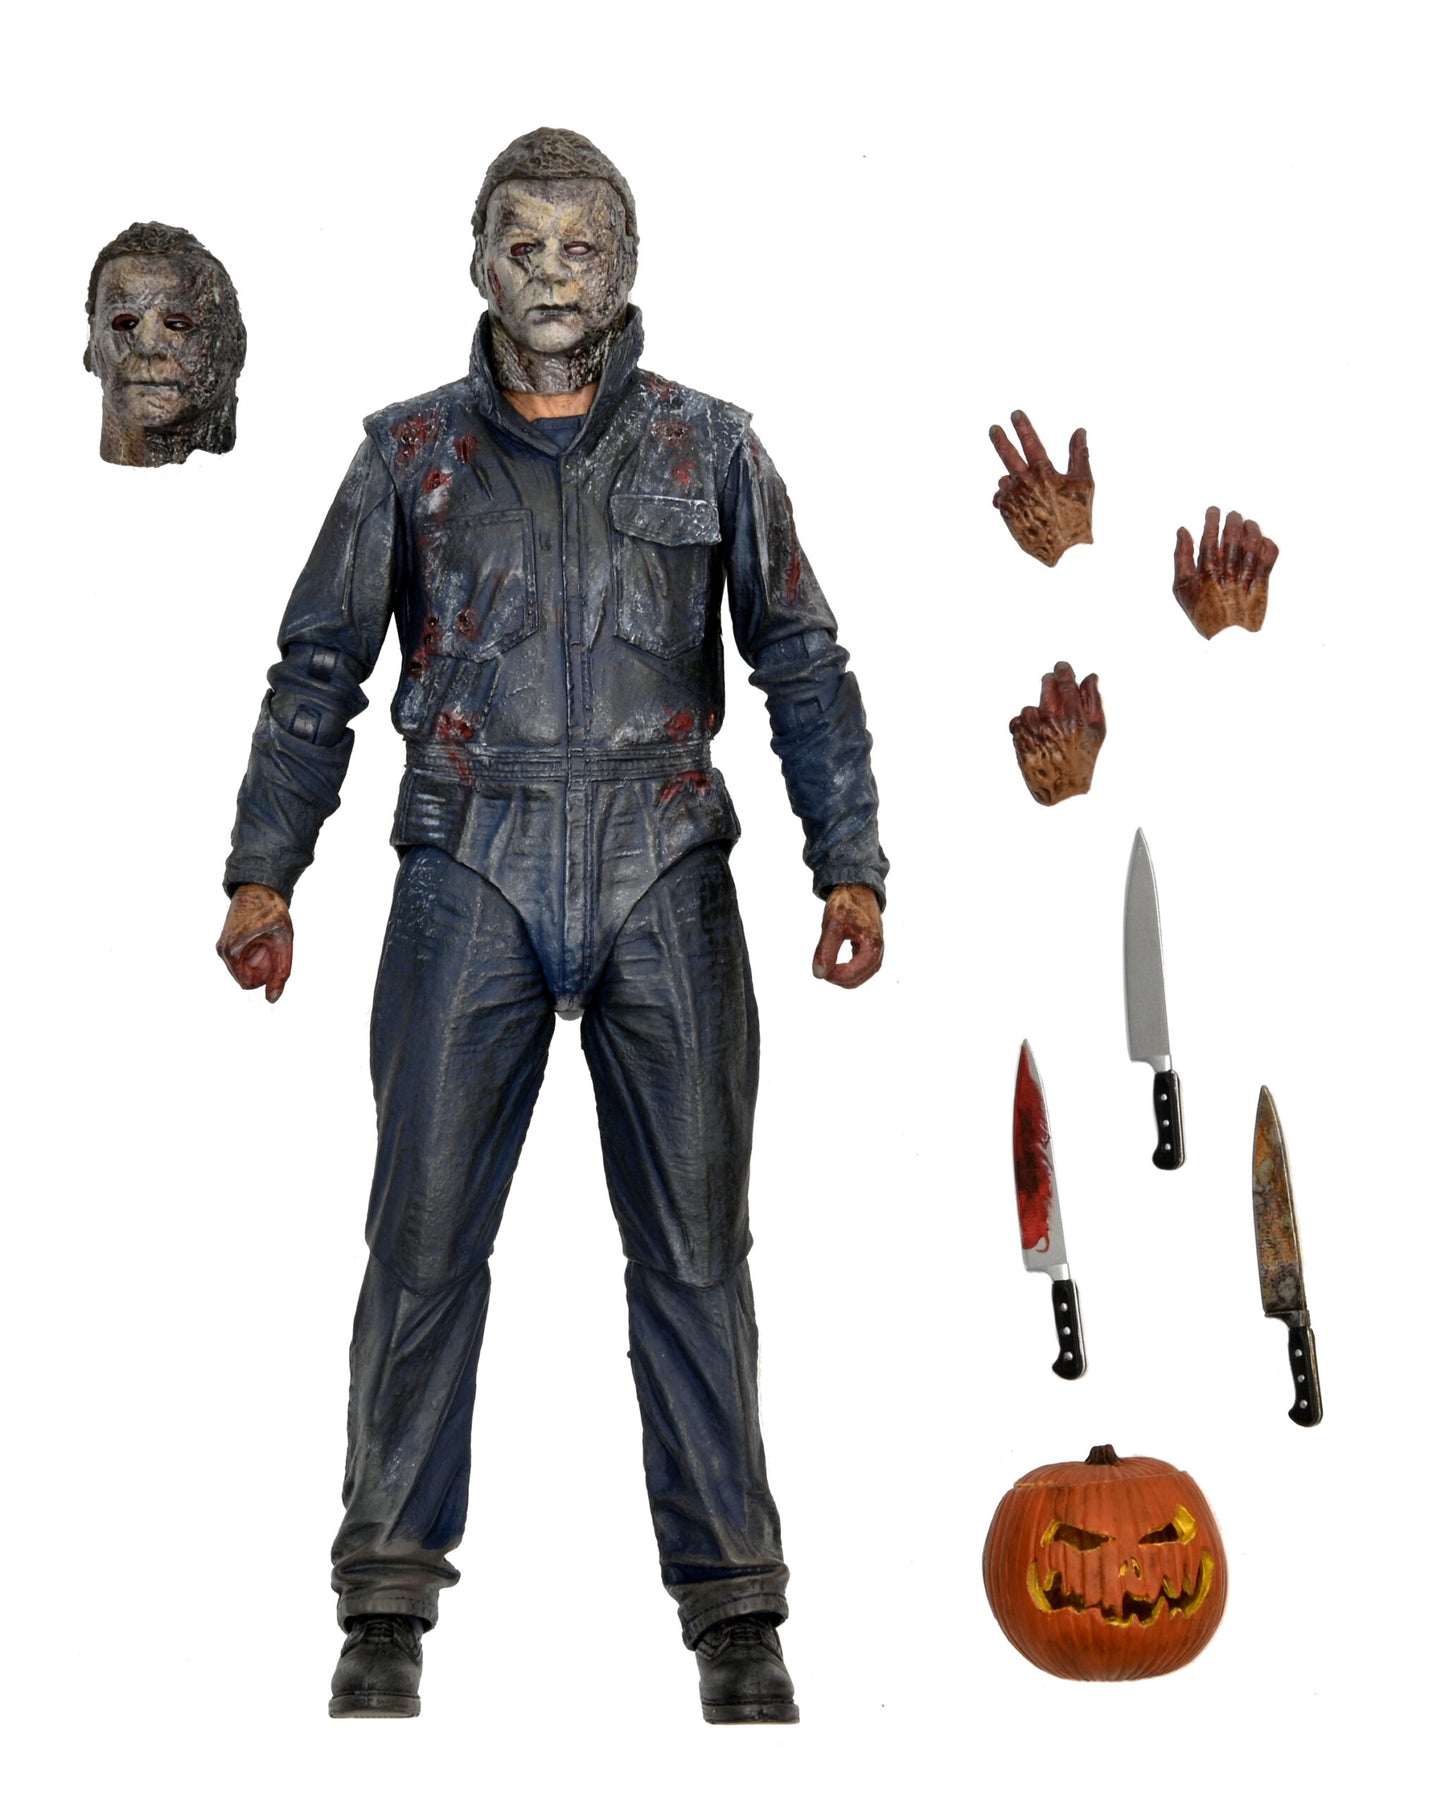 NECA 7” Scale Action Figure – Ultimate Michael Myers (Halloween Ends)